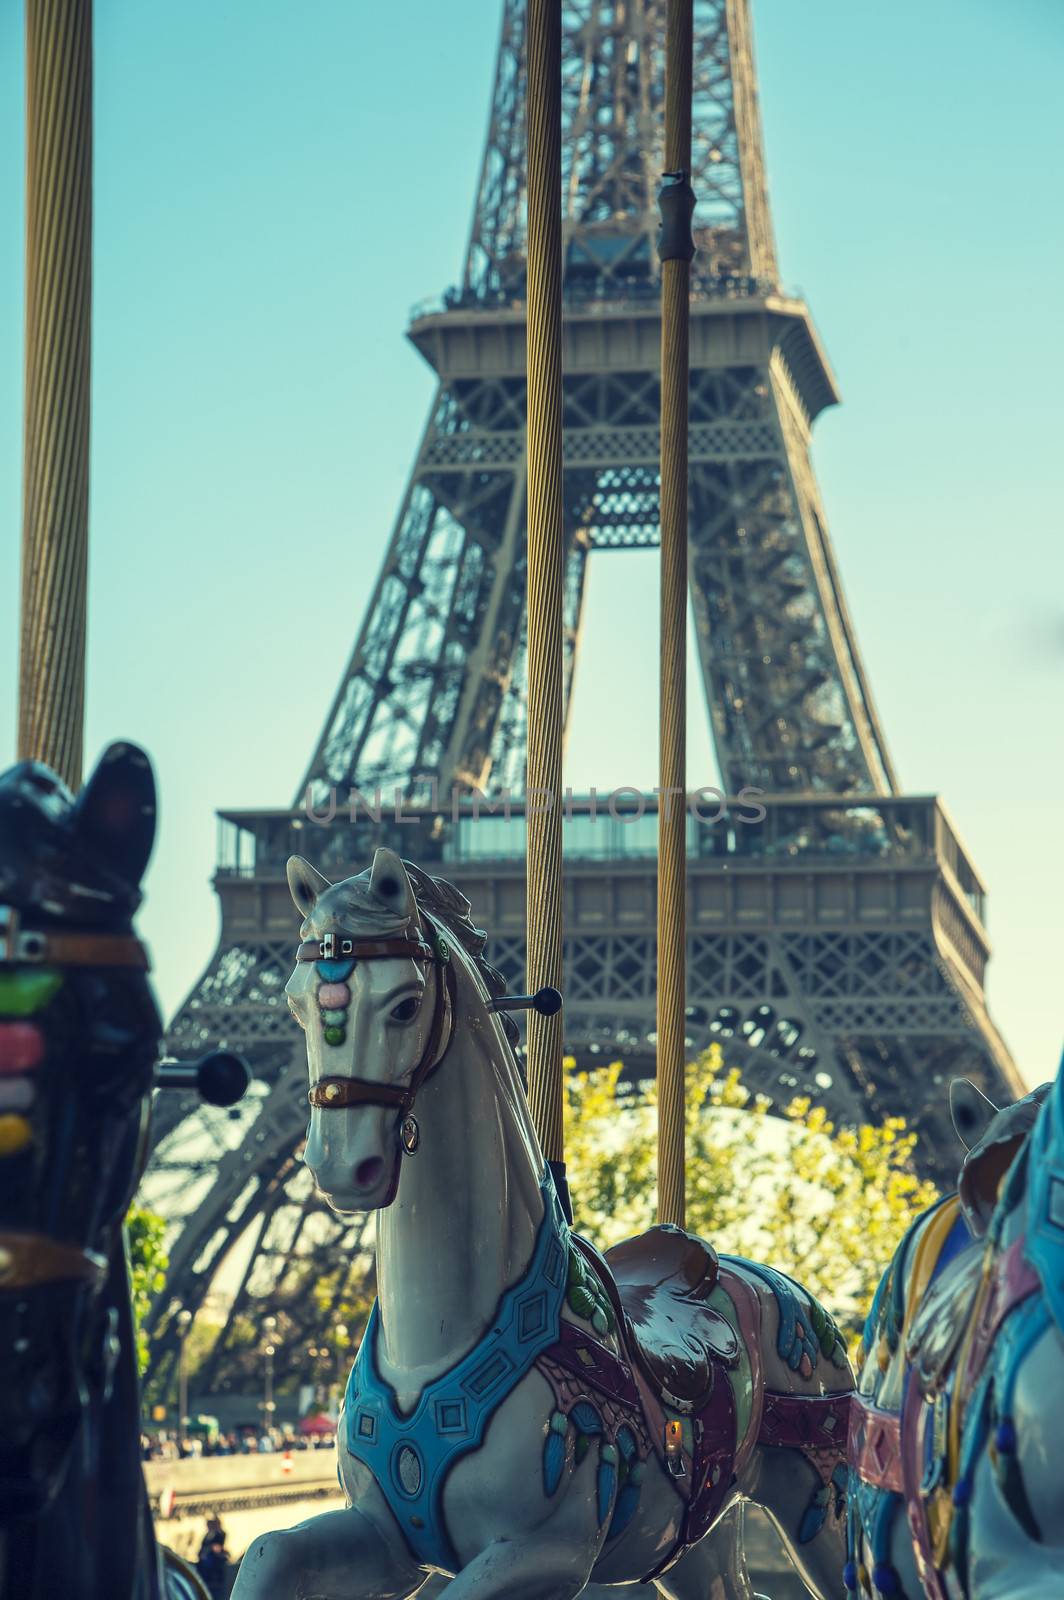 Vintage carousel with white horses in Paris